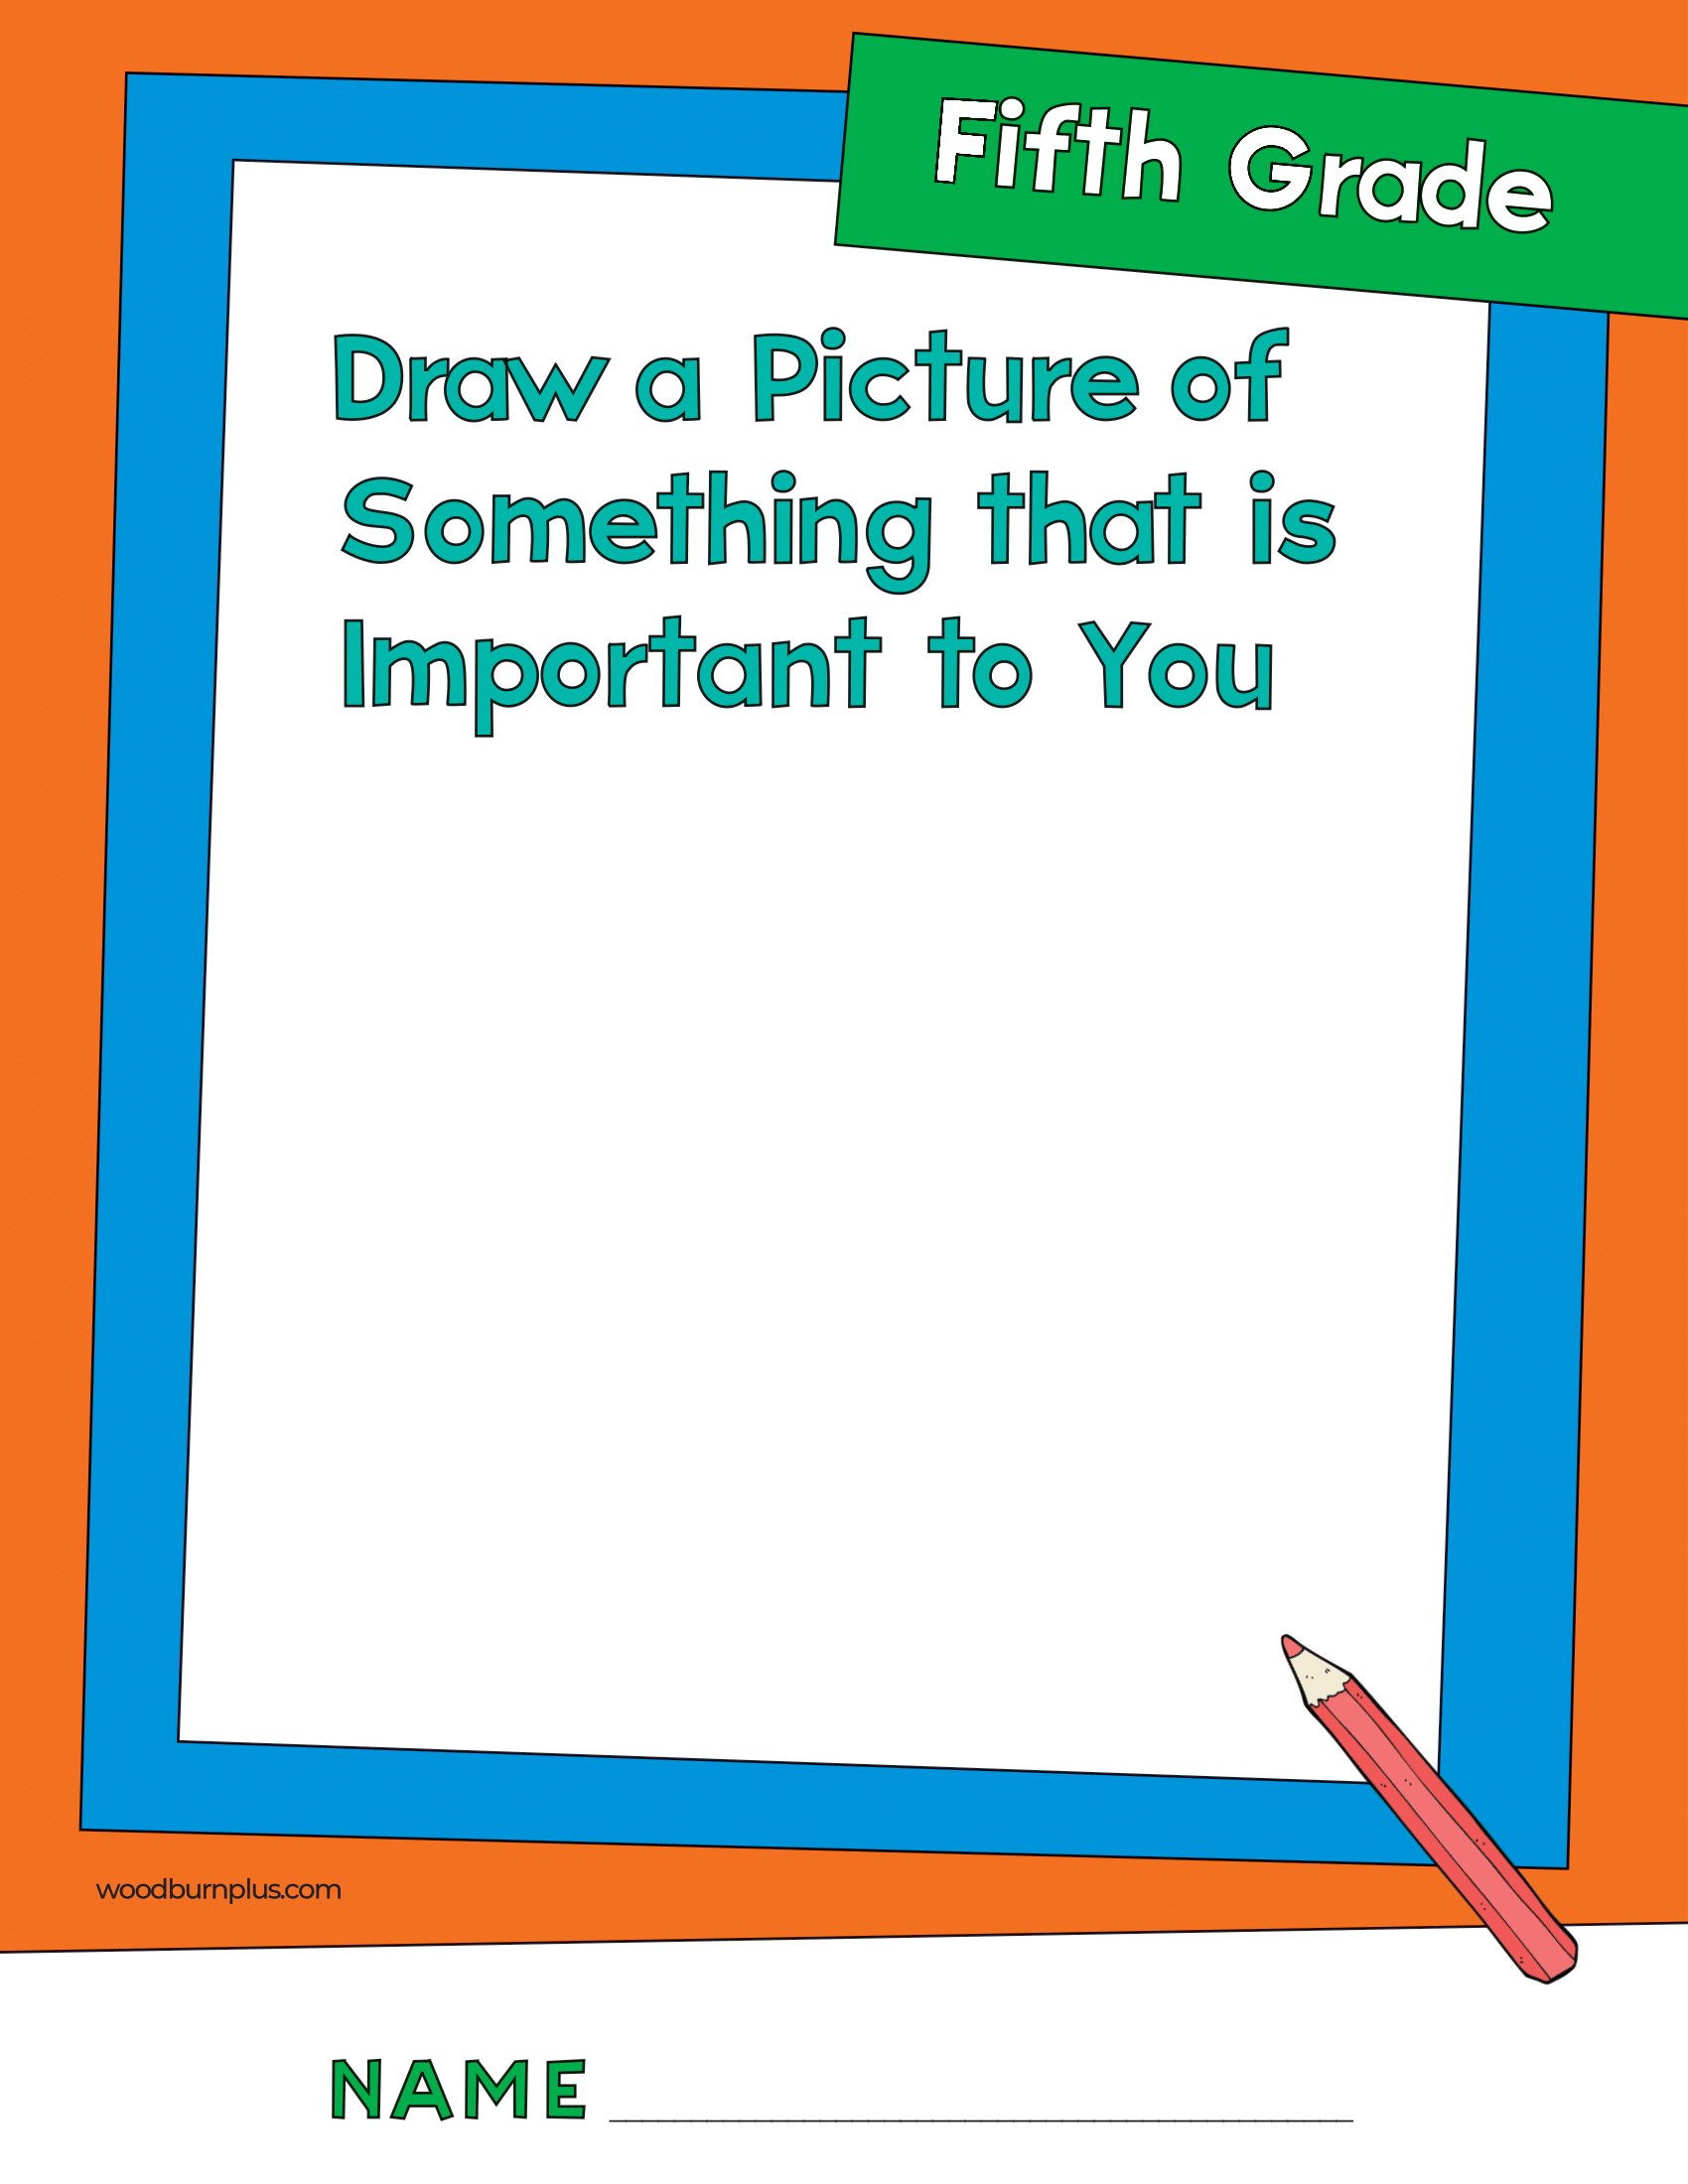 Fifth Grade - Draw Something Important to You